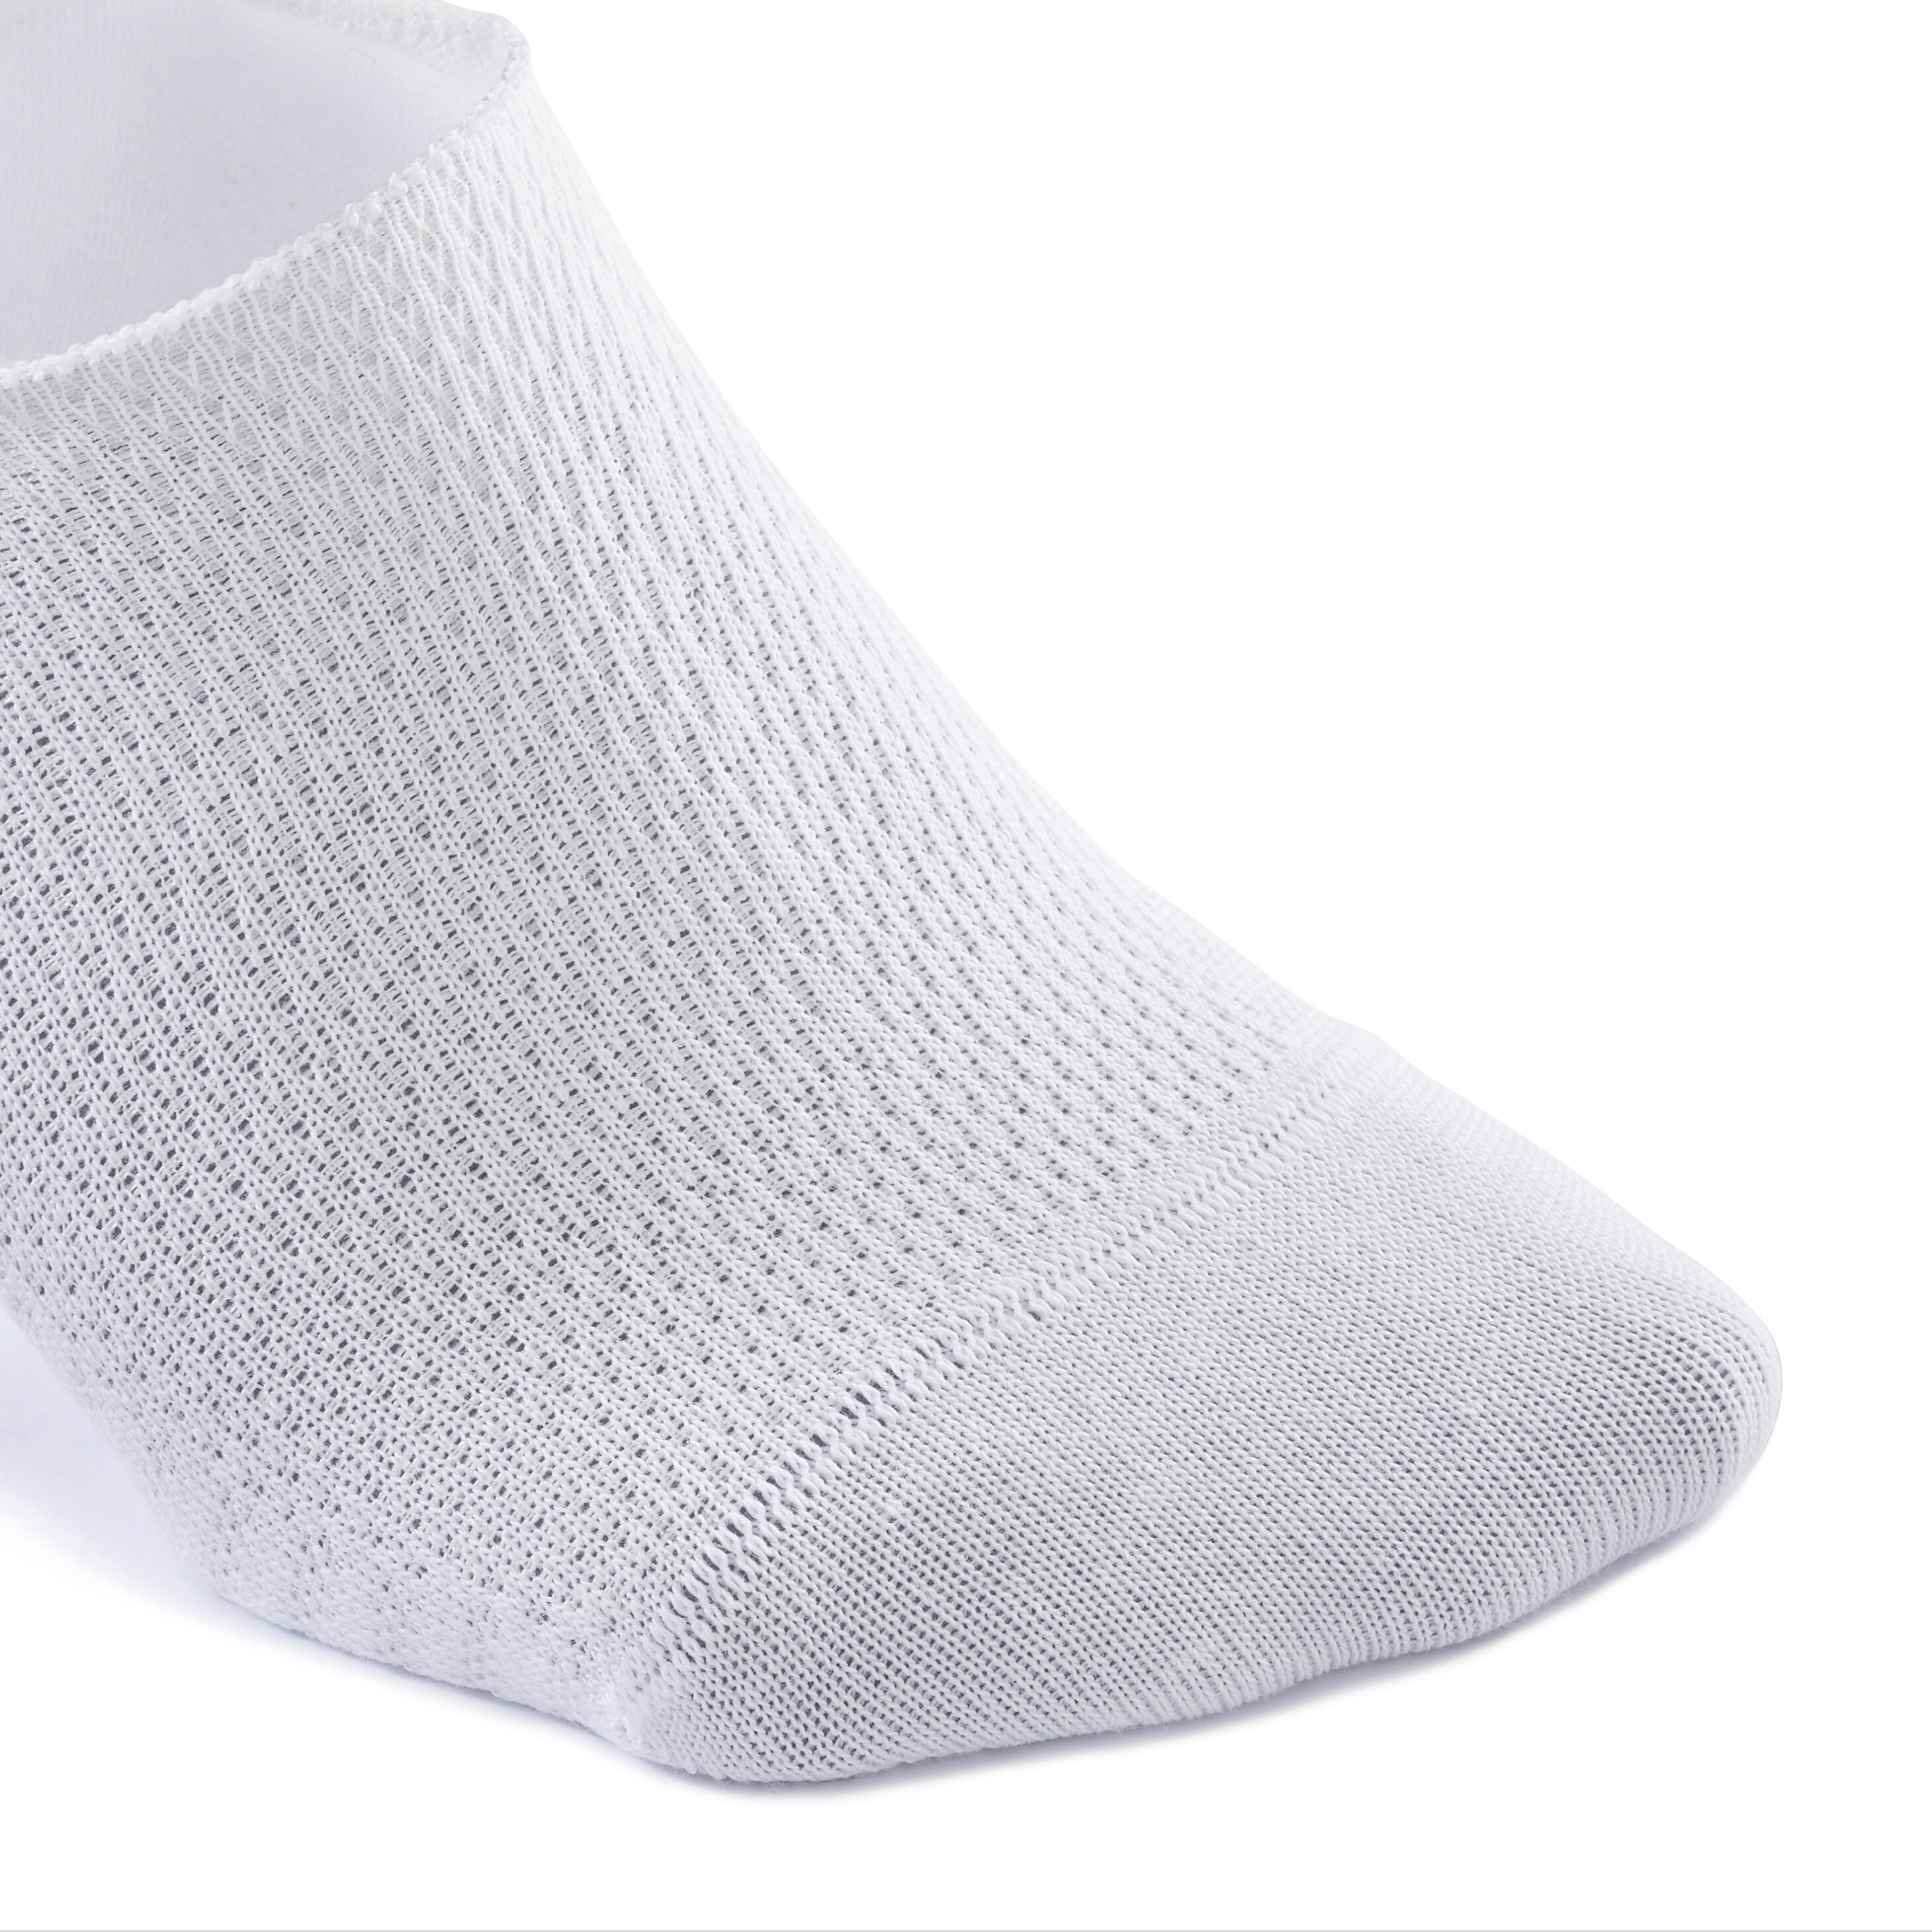 Invisible walking socks - pack of 2 pairs - white/grey 8/9